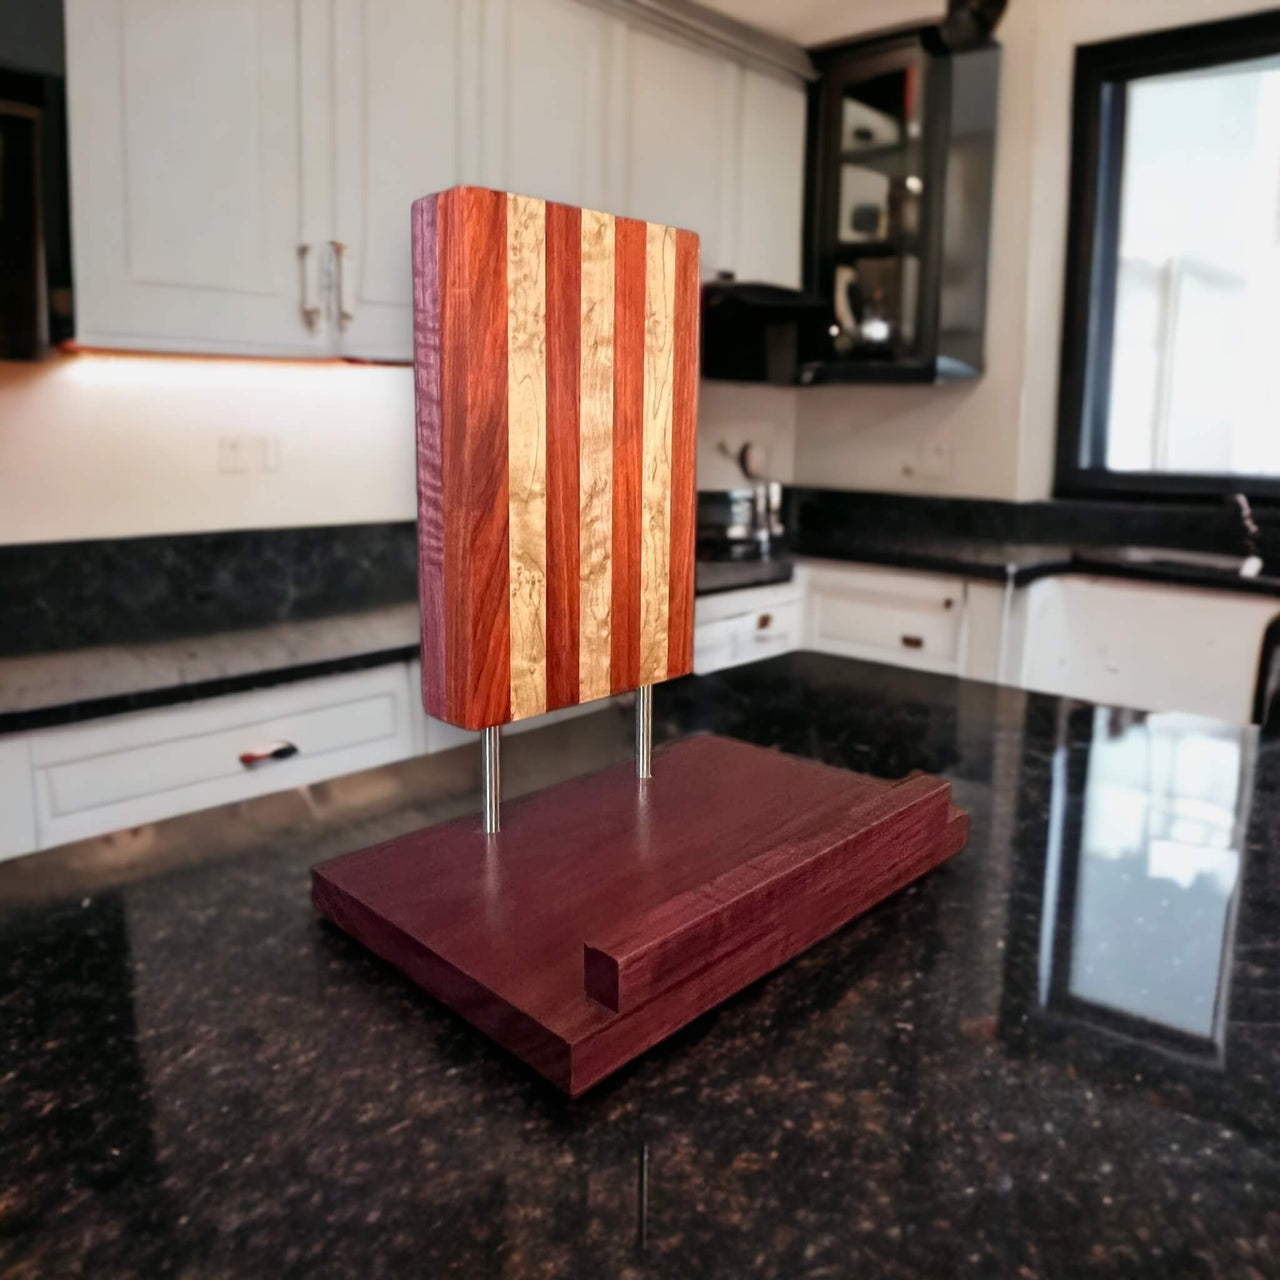 The Founding Feathers Knife Block